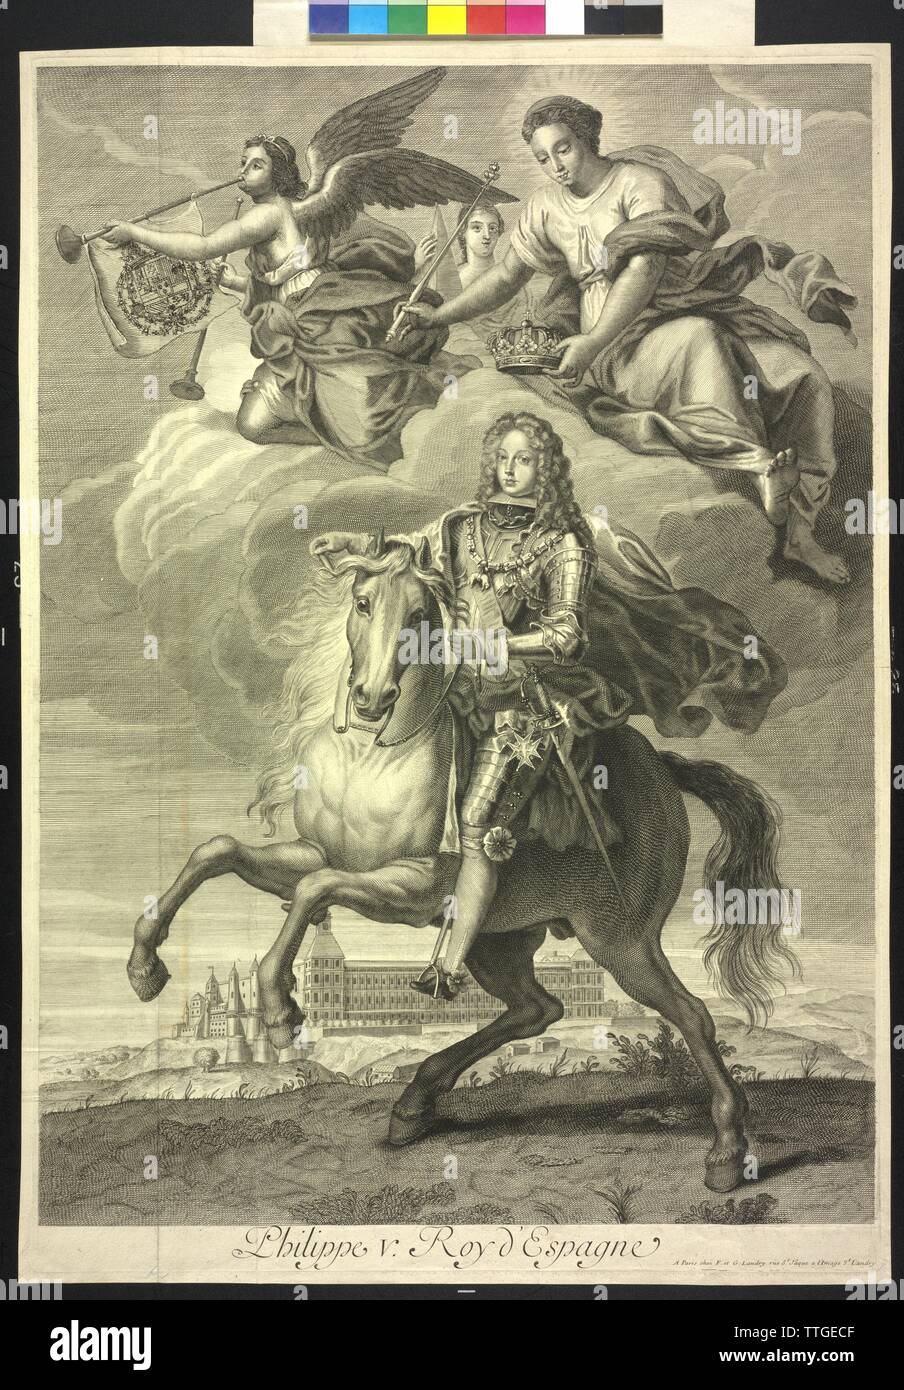 Philipp V, King of Spain, equestrian image. copper engraving, Additional-Rights-Clearance-Info-Not-Available Stock Photo